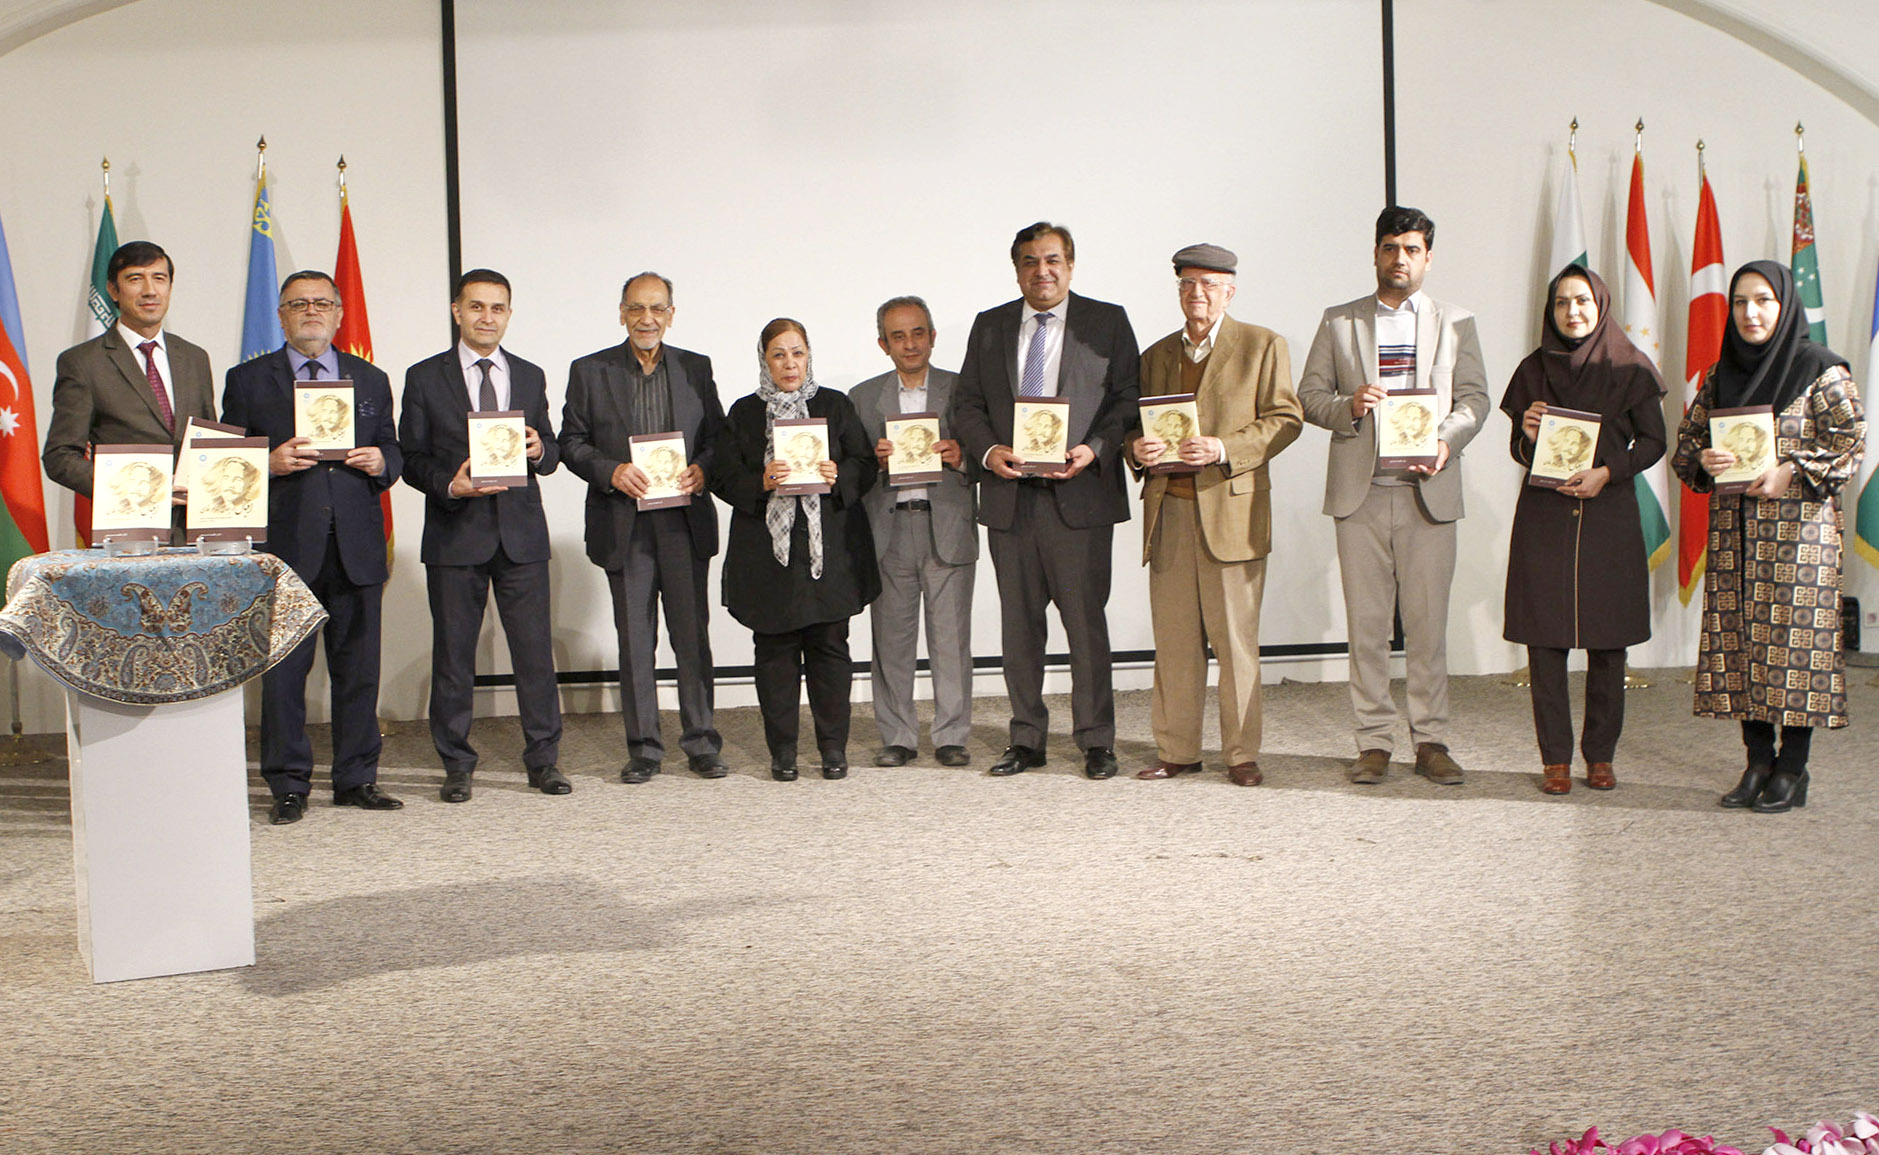 The book &quot;Iqbal in the Contemporary Persian World&quot; launched on Nov. 23rd